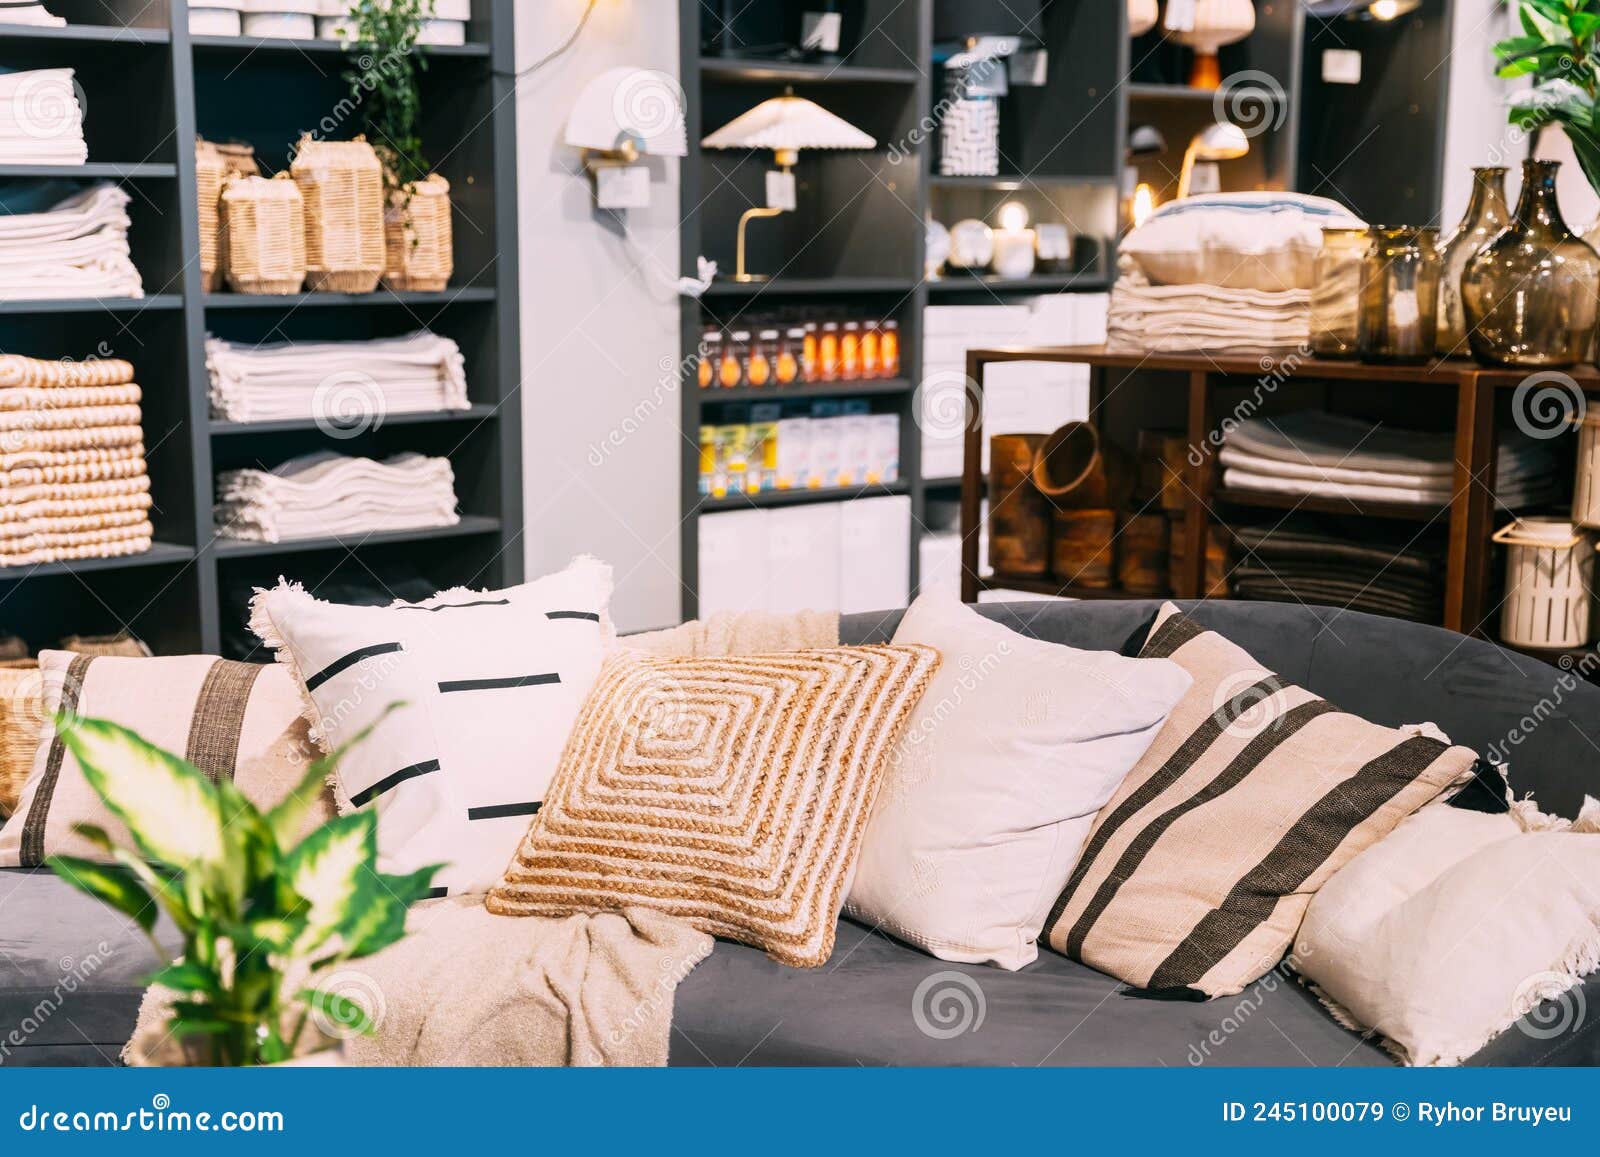 Home Accessories and Household Products in Store of Shopping Centre. View  of Home Accessories for Living Room in Shop Stock Image - Image of display,  retail: 245100079